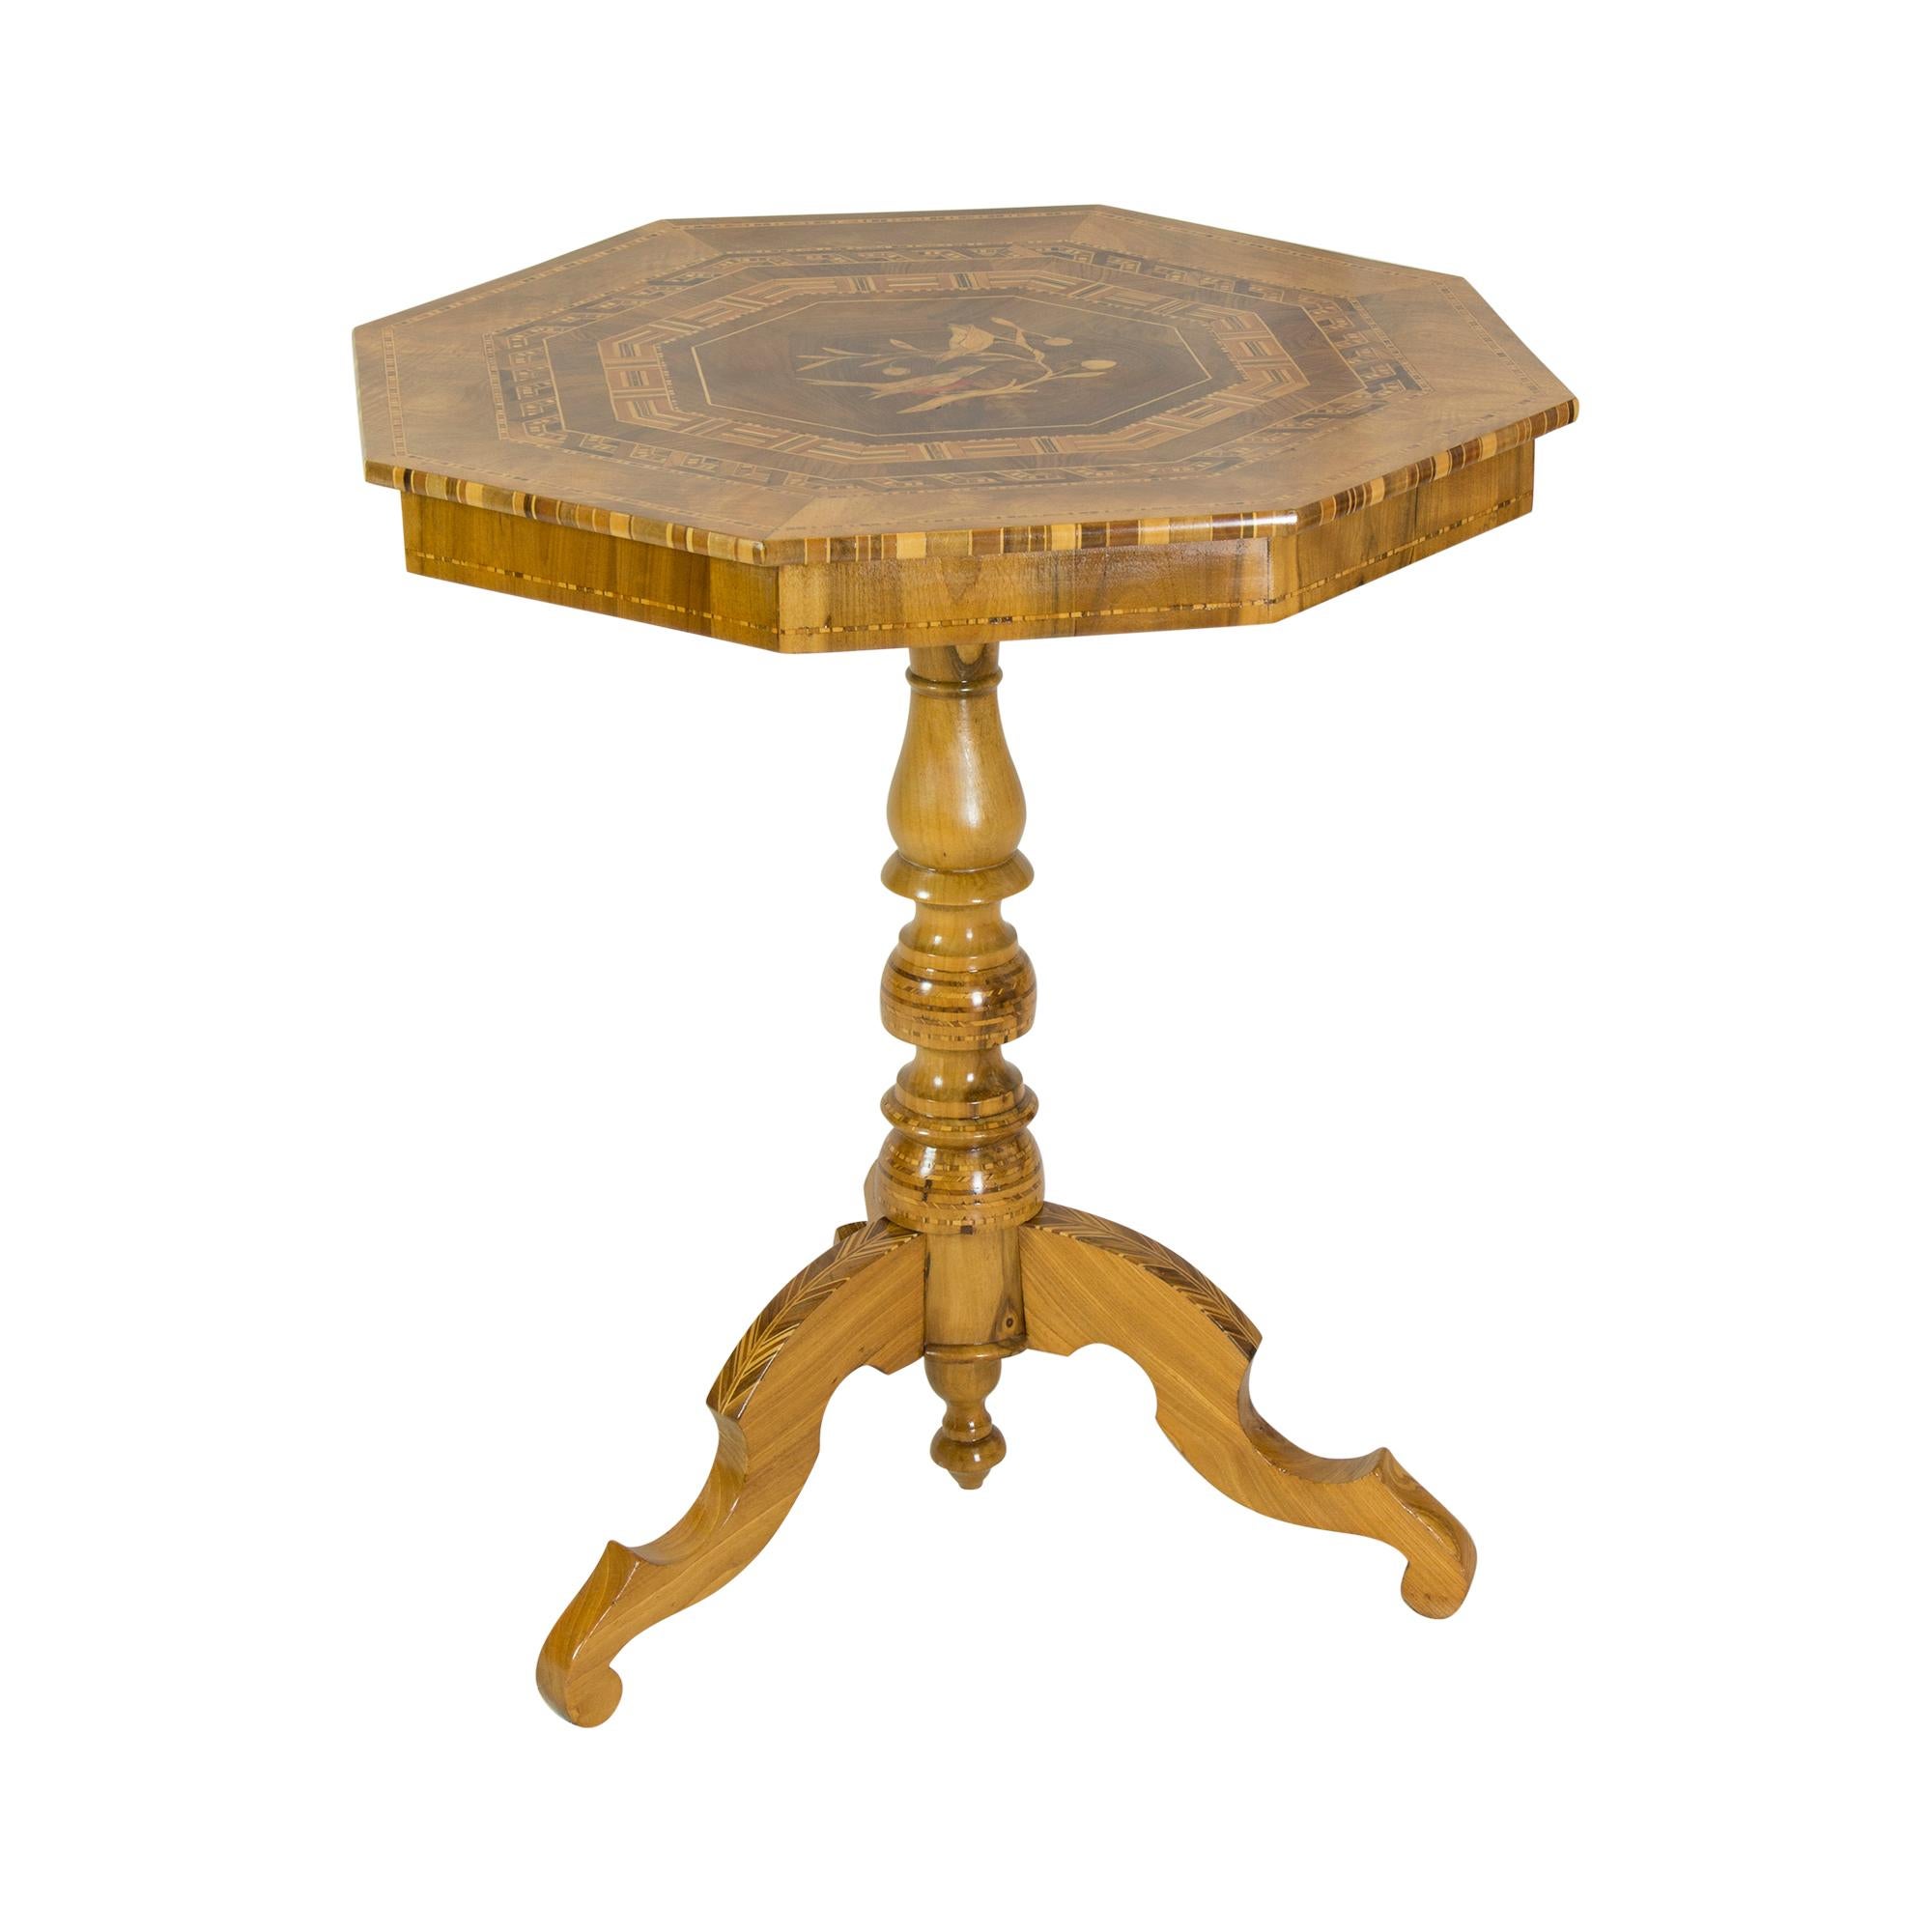 The walnut table stands on a central baluster column, which in turn rests on three outriggers on the floor. On the table top there is a very beautiful inlay work with a picture of two birds. The table has been lovingly restored and is in very good